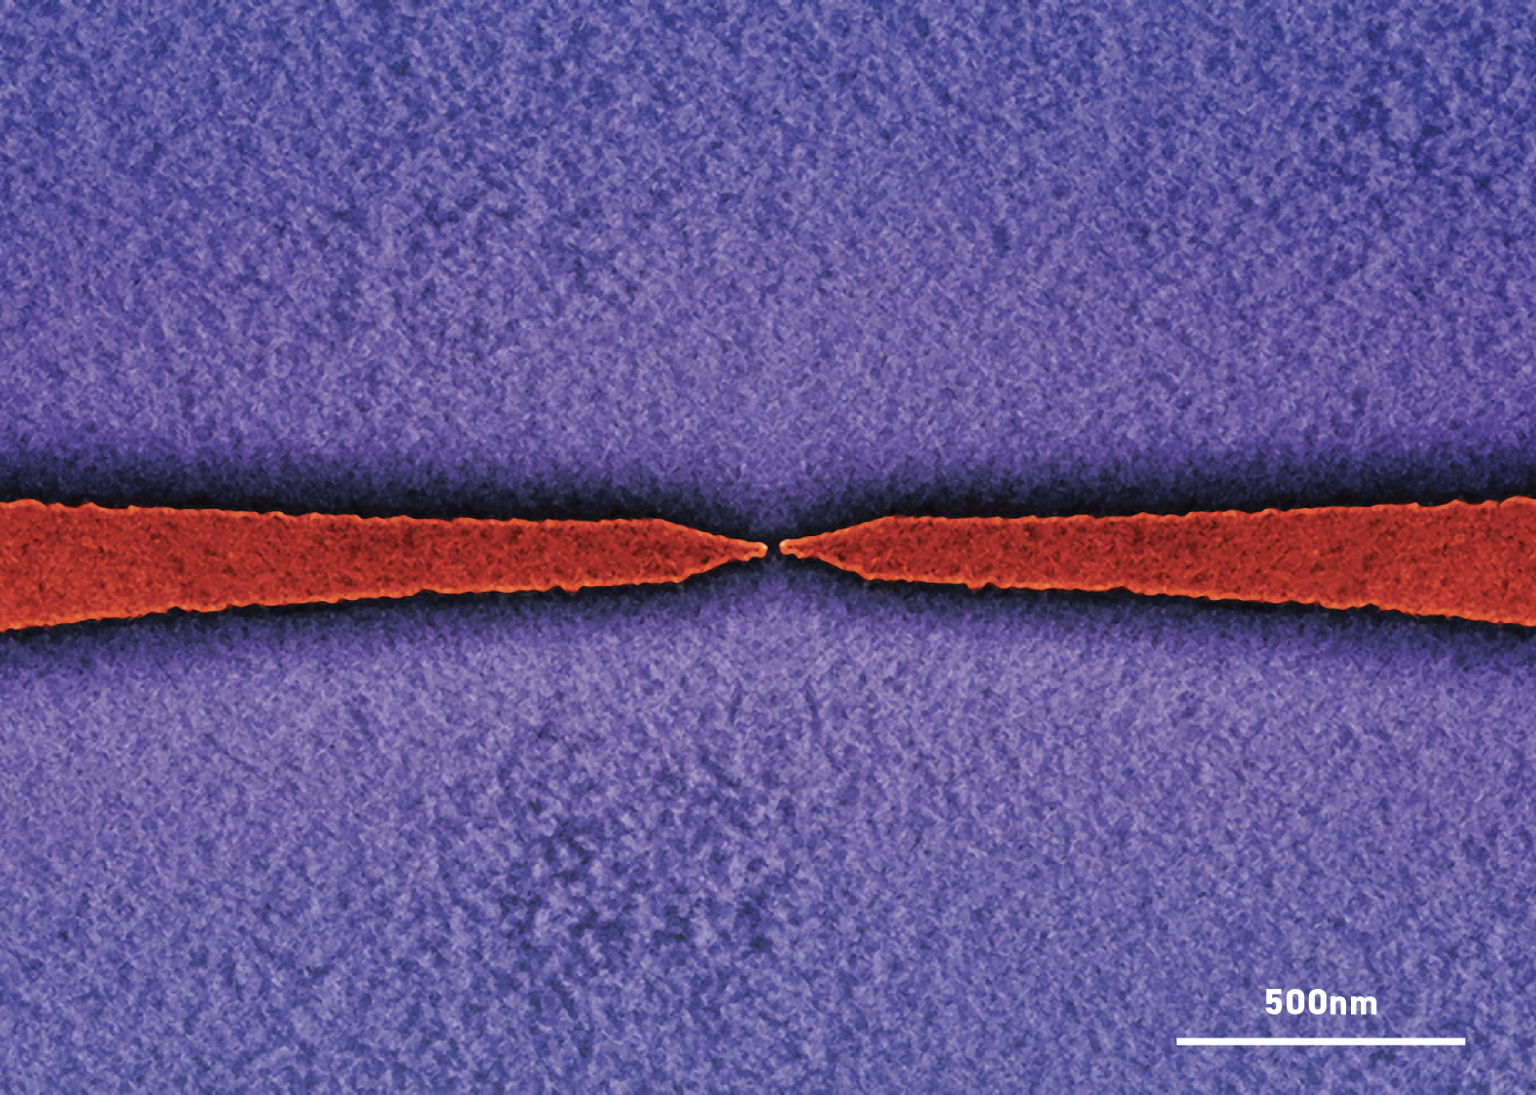 COLOUR-ENHANCED SEM IMAGE OF A NANOSCALE GAP IN A METAL ELECTRODE PAIR WITH STRONG ELECTRON TRANSPORT.